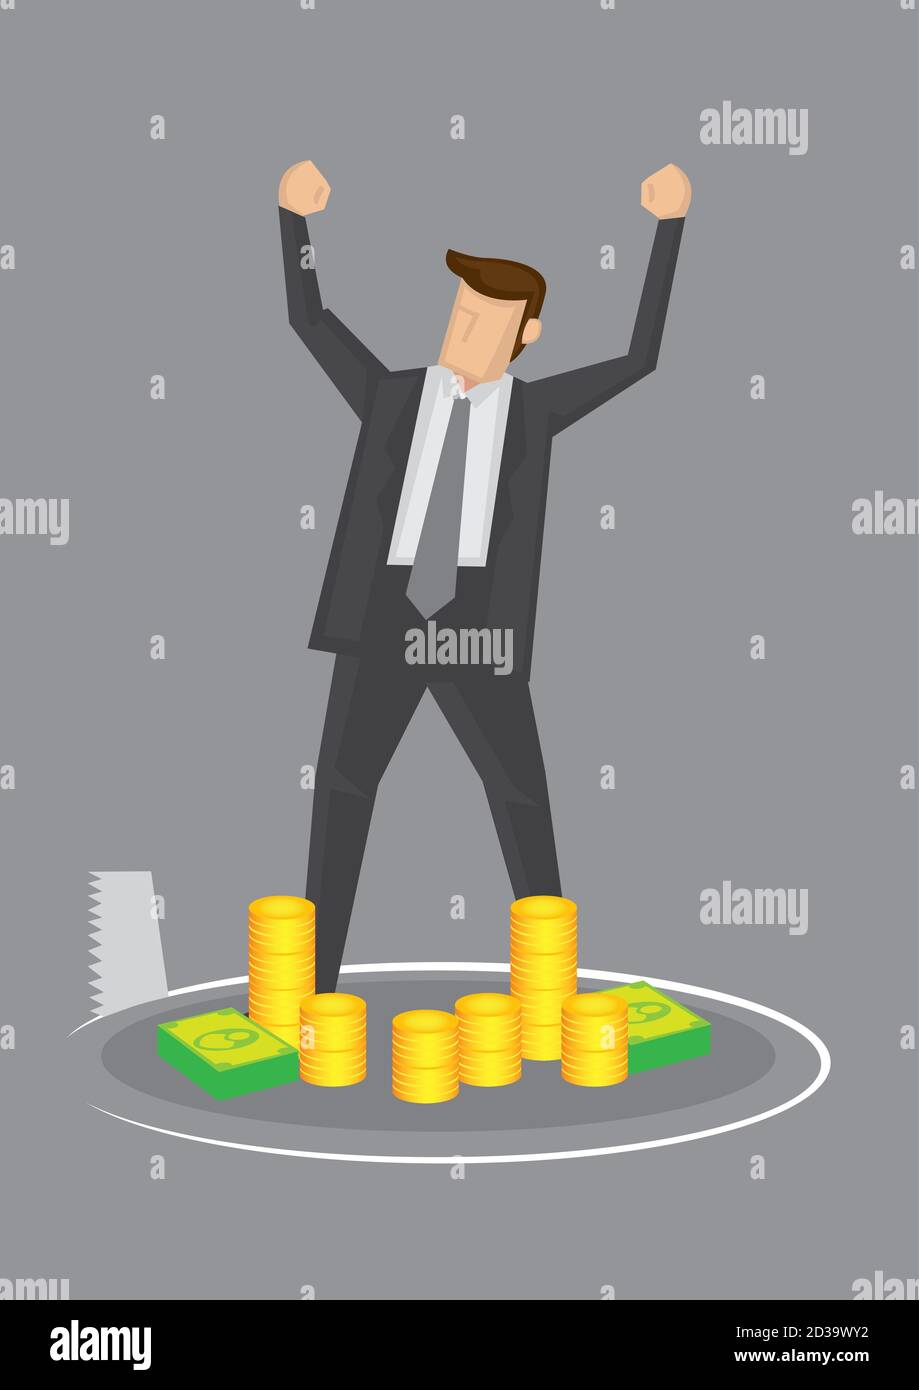 The confidence trap Stock Vector Images - Alamy